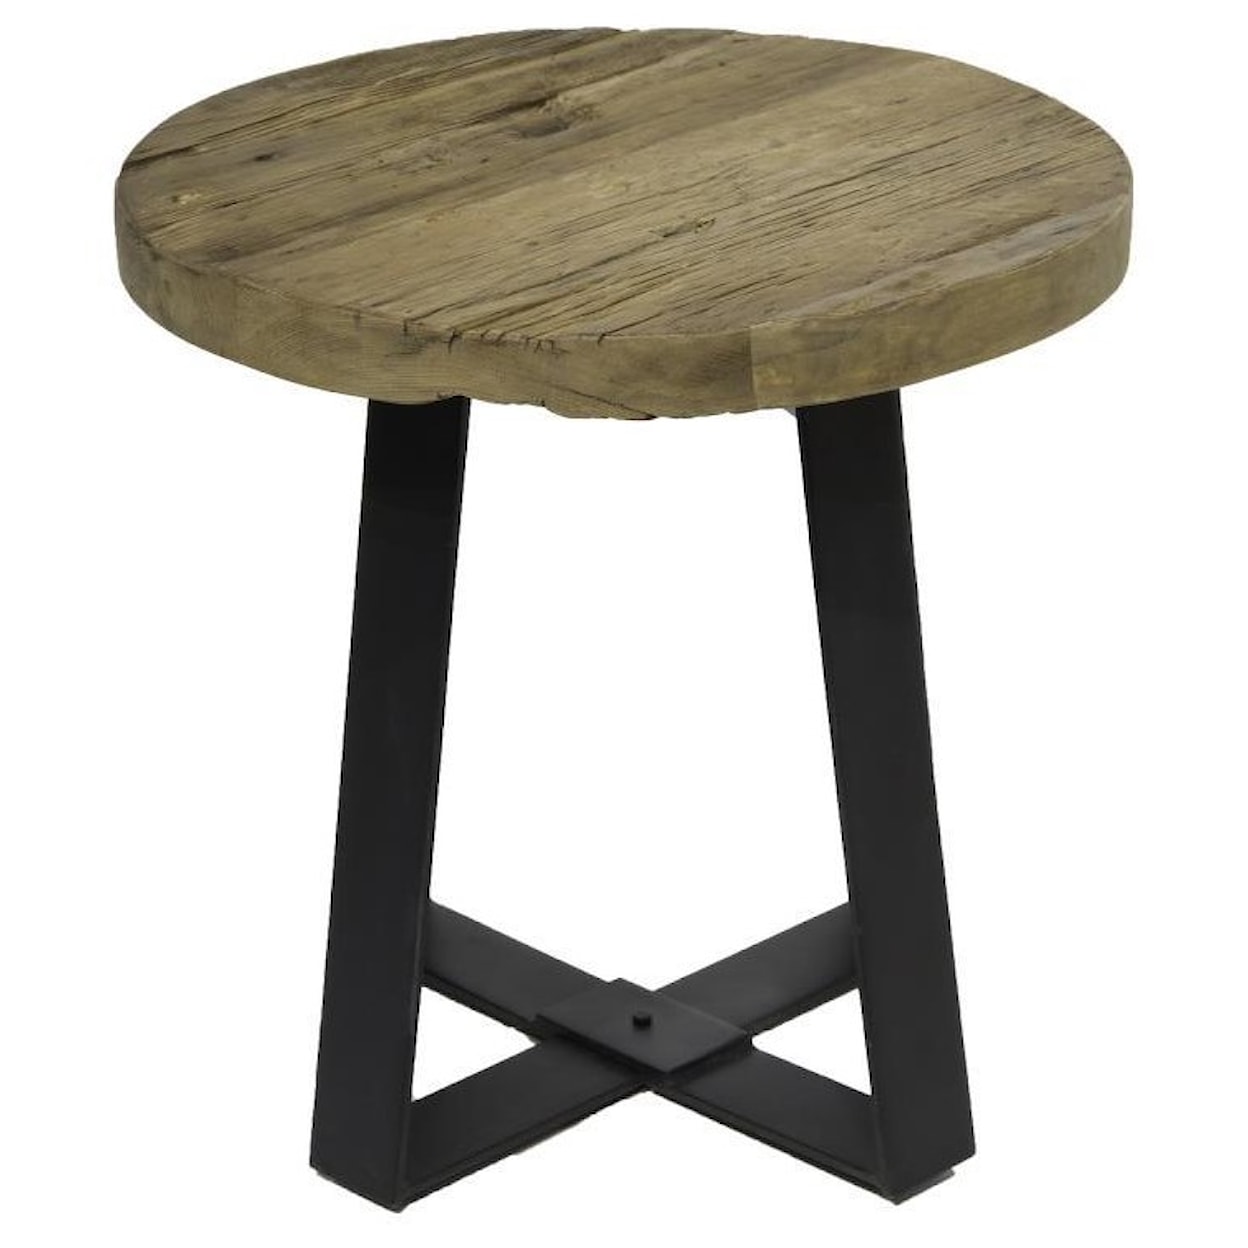 EAGLE INDUSTRIES Trunk Trunk Round End Table